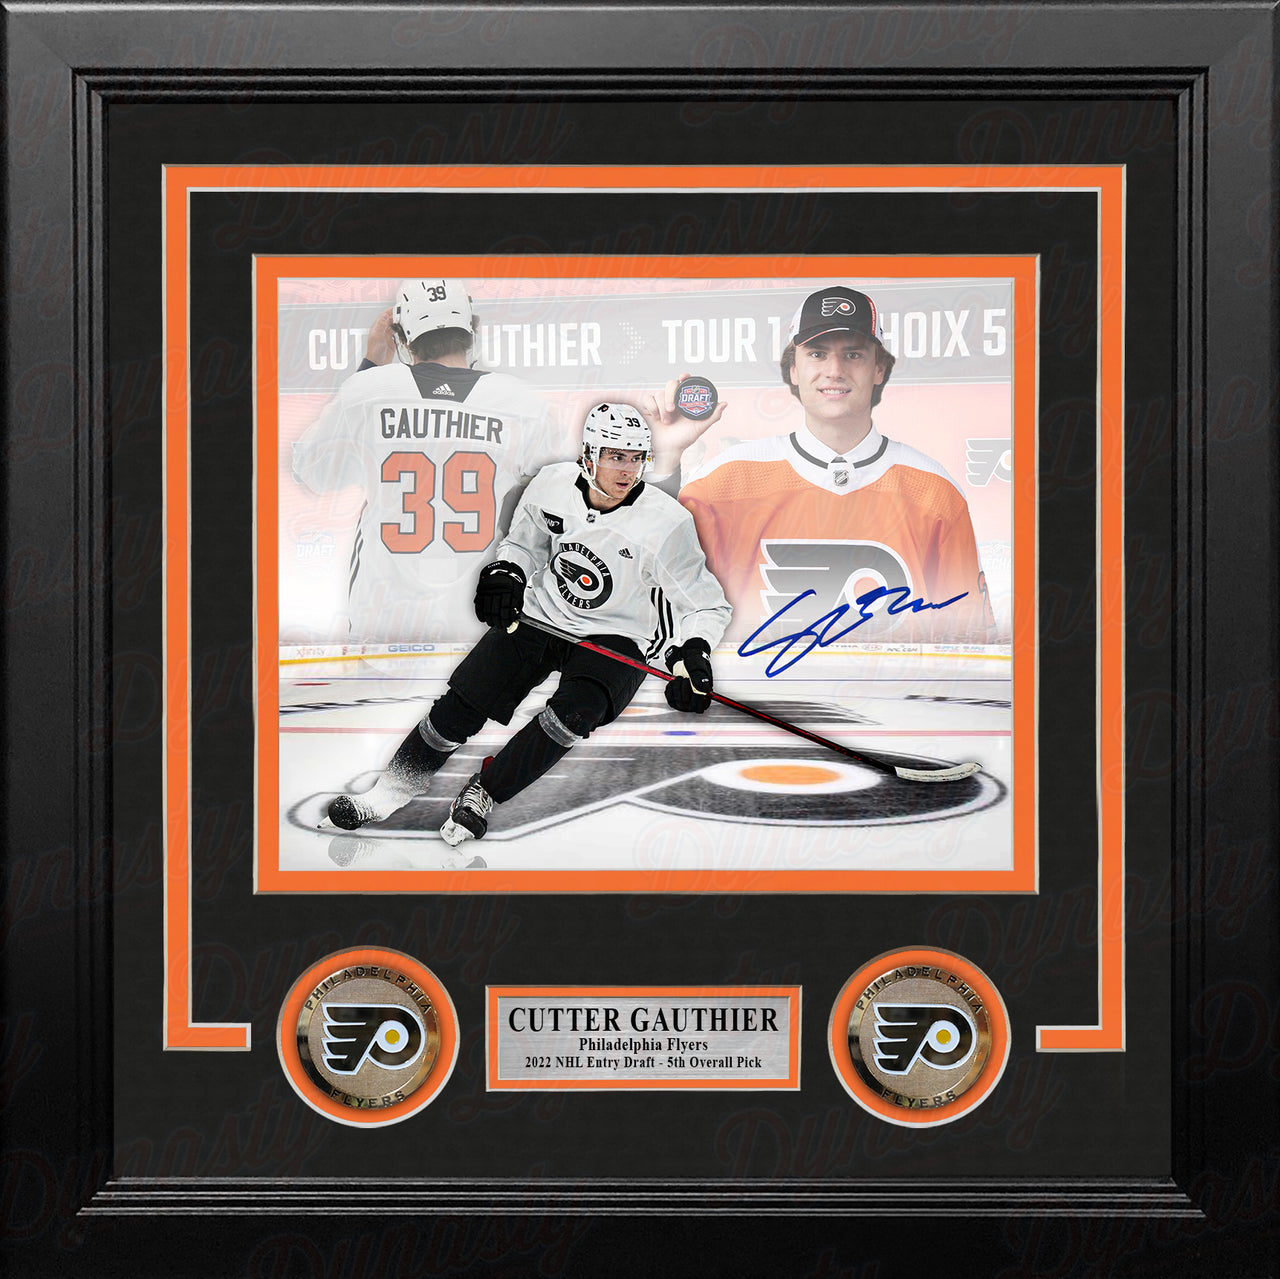 Cutter Gauthier Philadelphia Flyers Autographed 8" x 10" Framed Draft Hockey Collage Photo - Dynasty Sports & Framing 